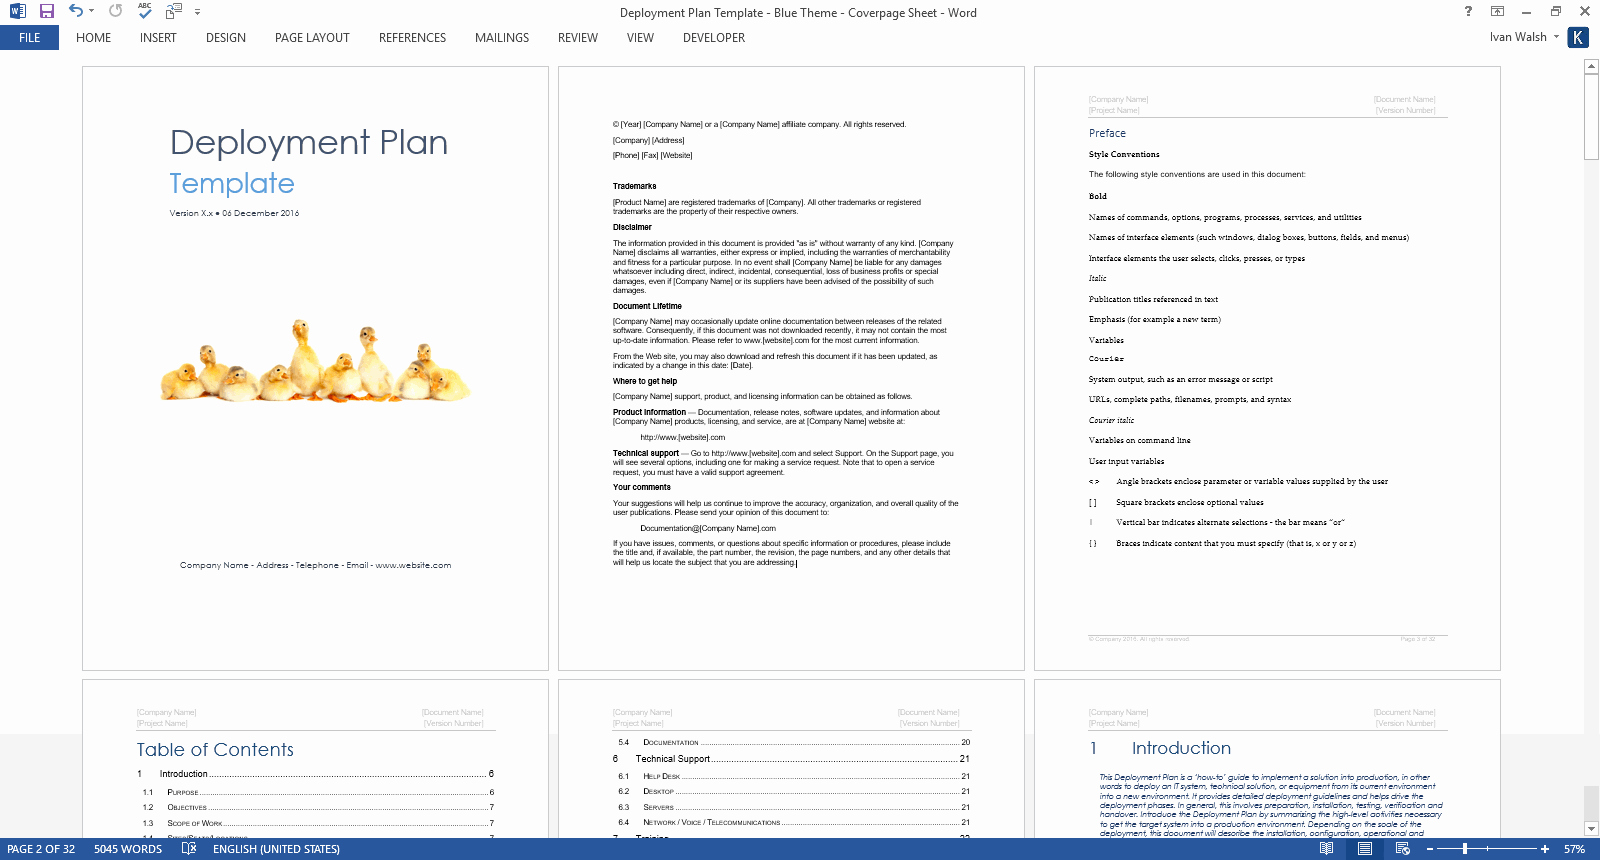 Use Case Documentation Template Elegant Deployment Plan Template Ms Word – Templates forms Checklists for Ms Fice and Apple Iwork